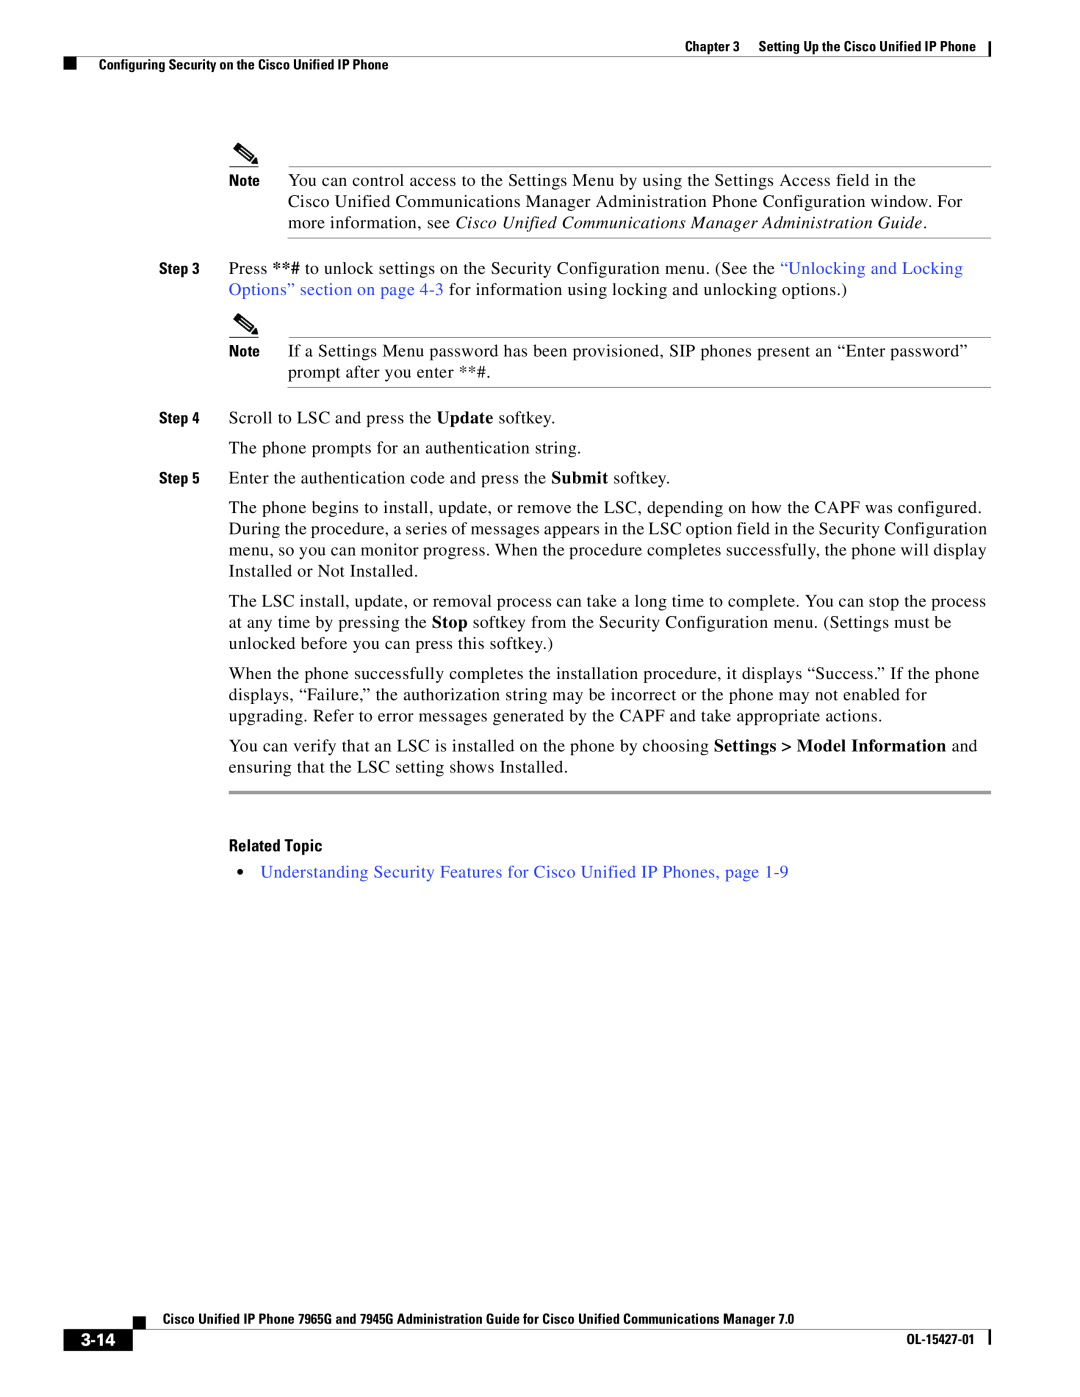 Cisco Systems 7965G, 7945G manual Related Topic, Understanding Security Features for Cisco Unified IP Phones, page, 3-14 